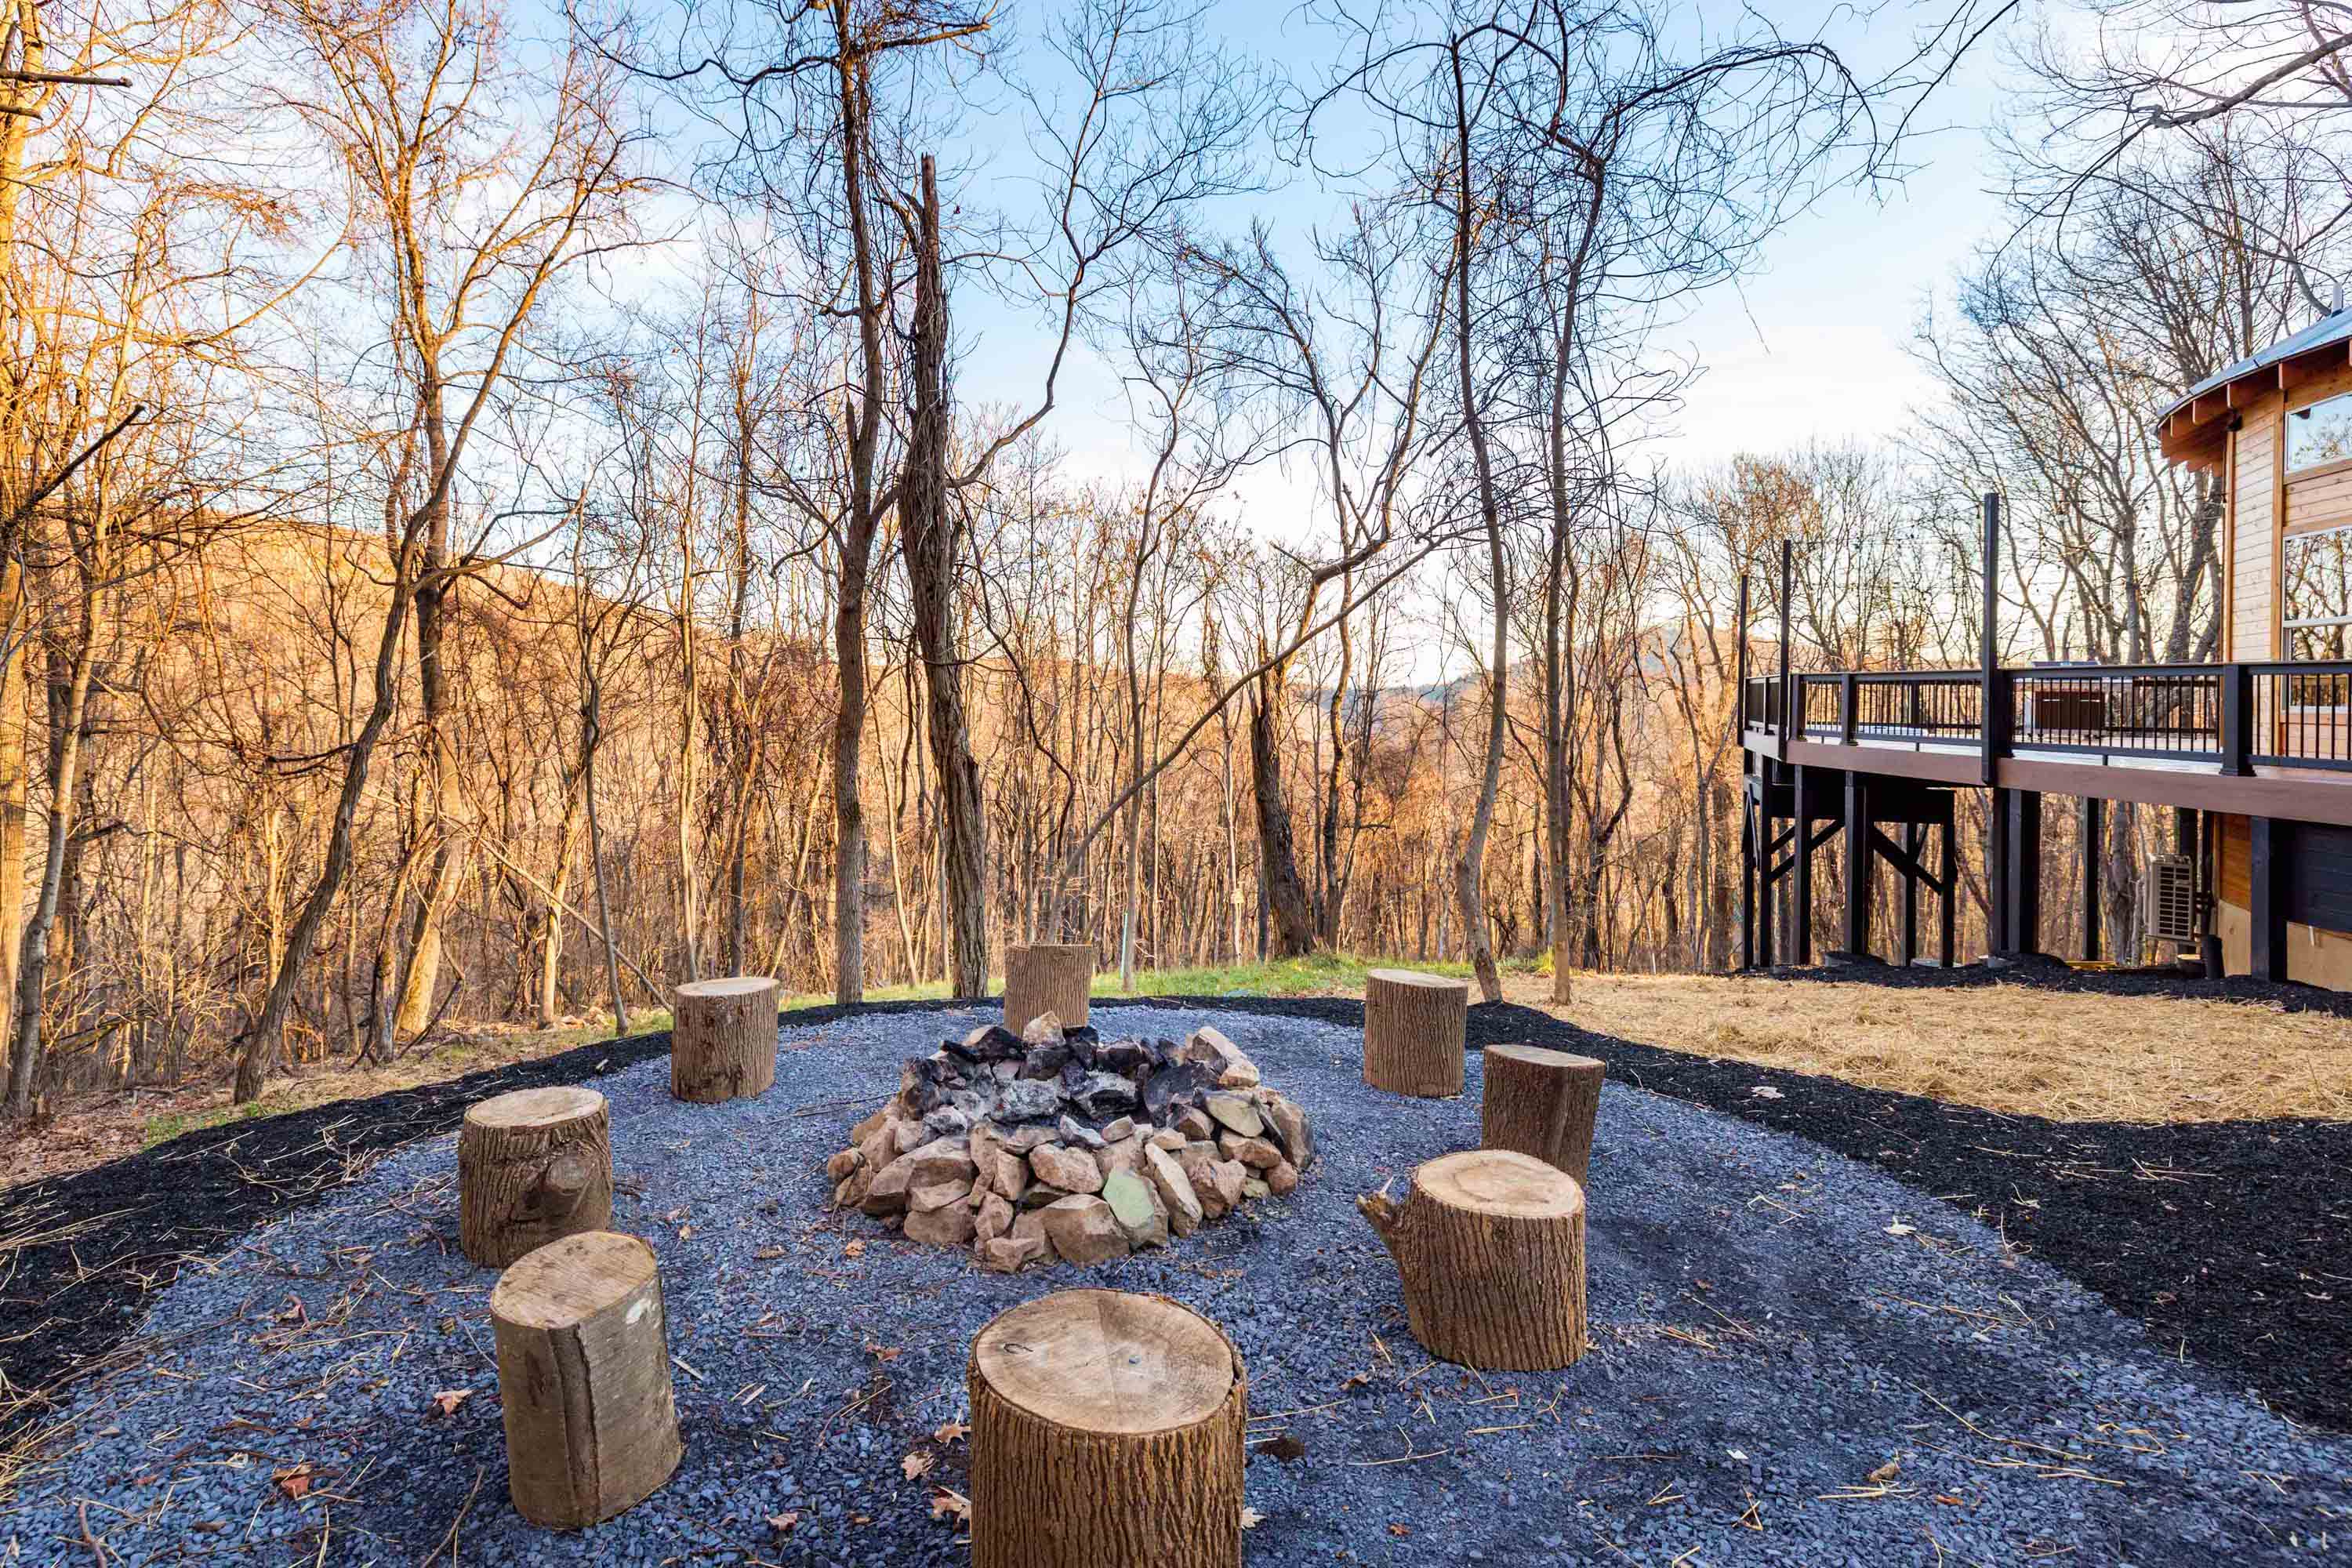 <span  class="uc_style_uc_tiles_grid_image_elementor_uc_items_attribute_title" style="color:#ffffff;">Firepit area with a cornhole game</span>